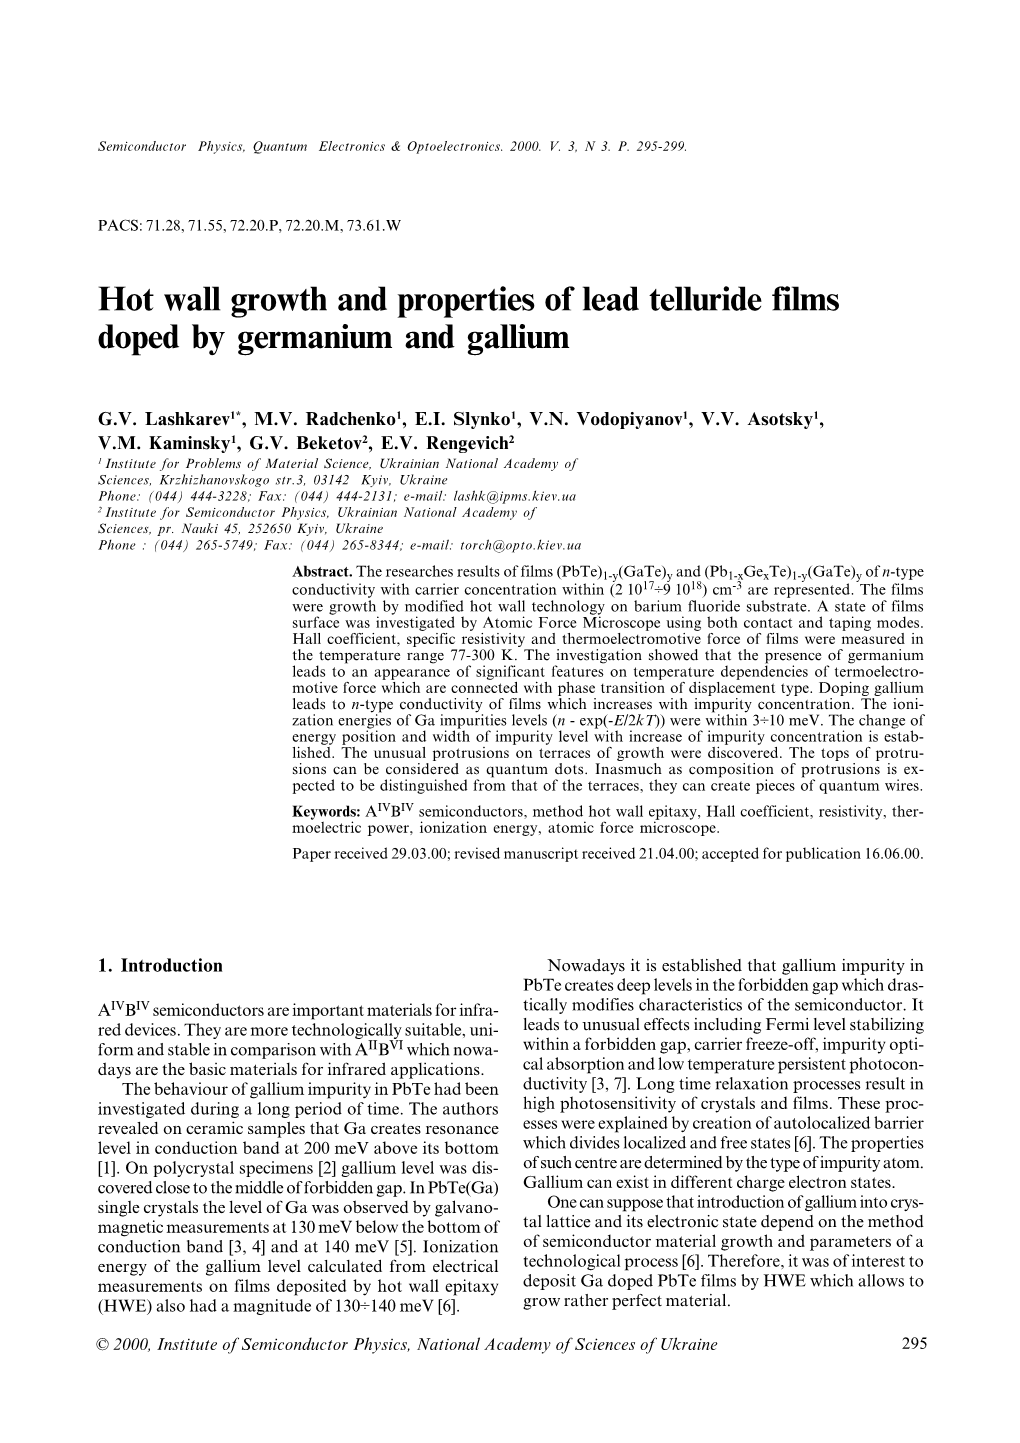 Hot Wall Growth and Properties of Lead Telluride Films Doped by Germanium and Gallium